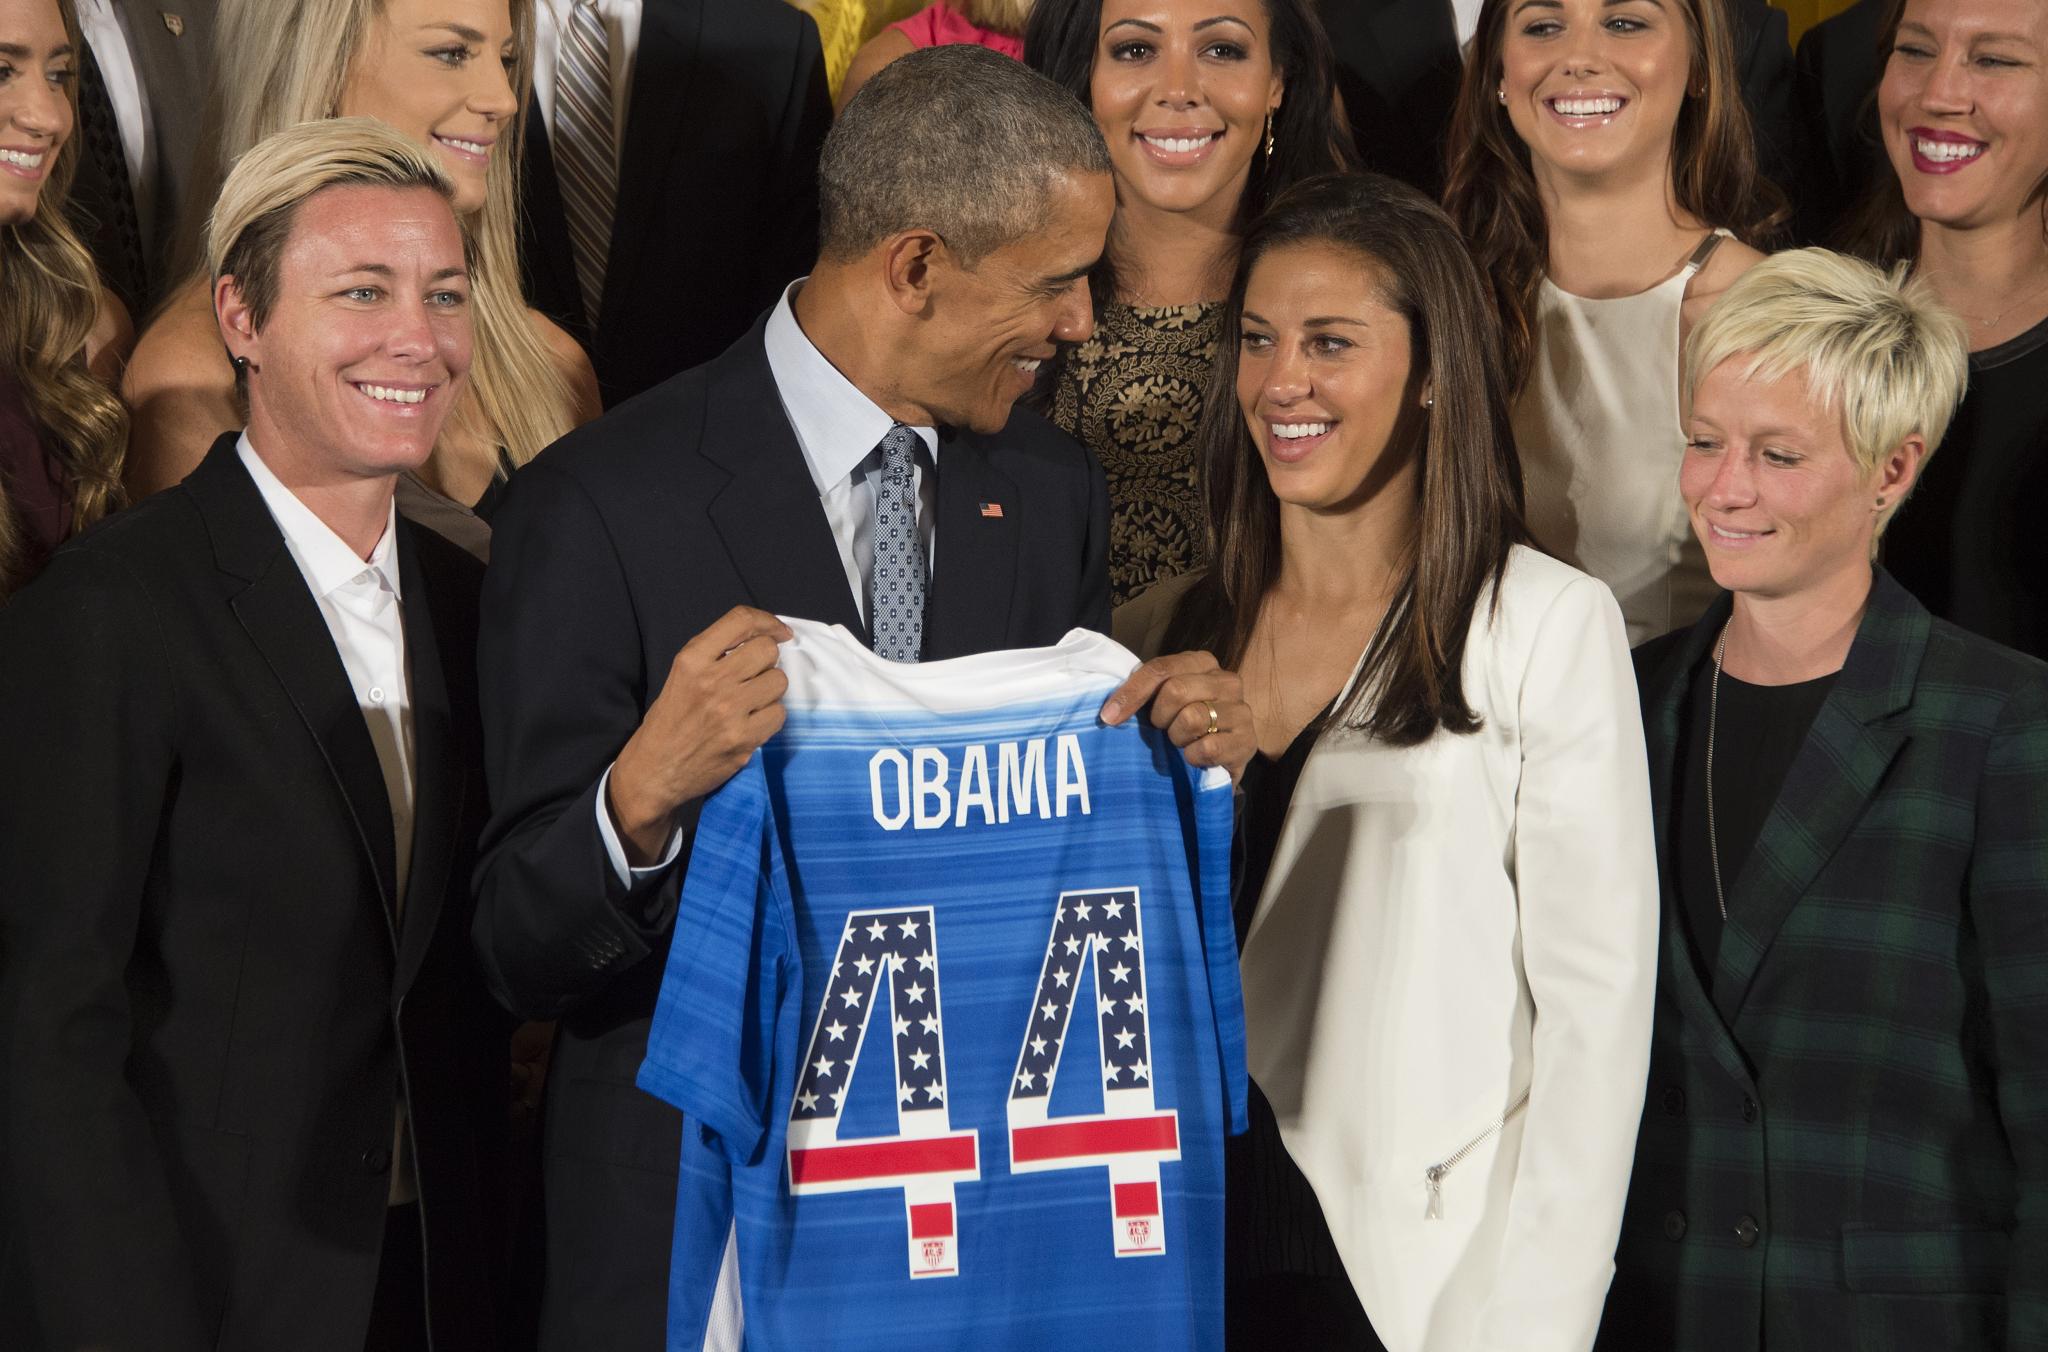 Obama: Women's US Soccer Team Proved 'Playing Like A Girl' Means You're a Badass
